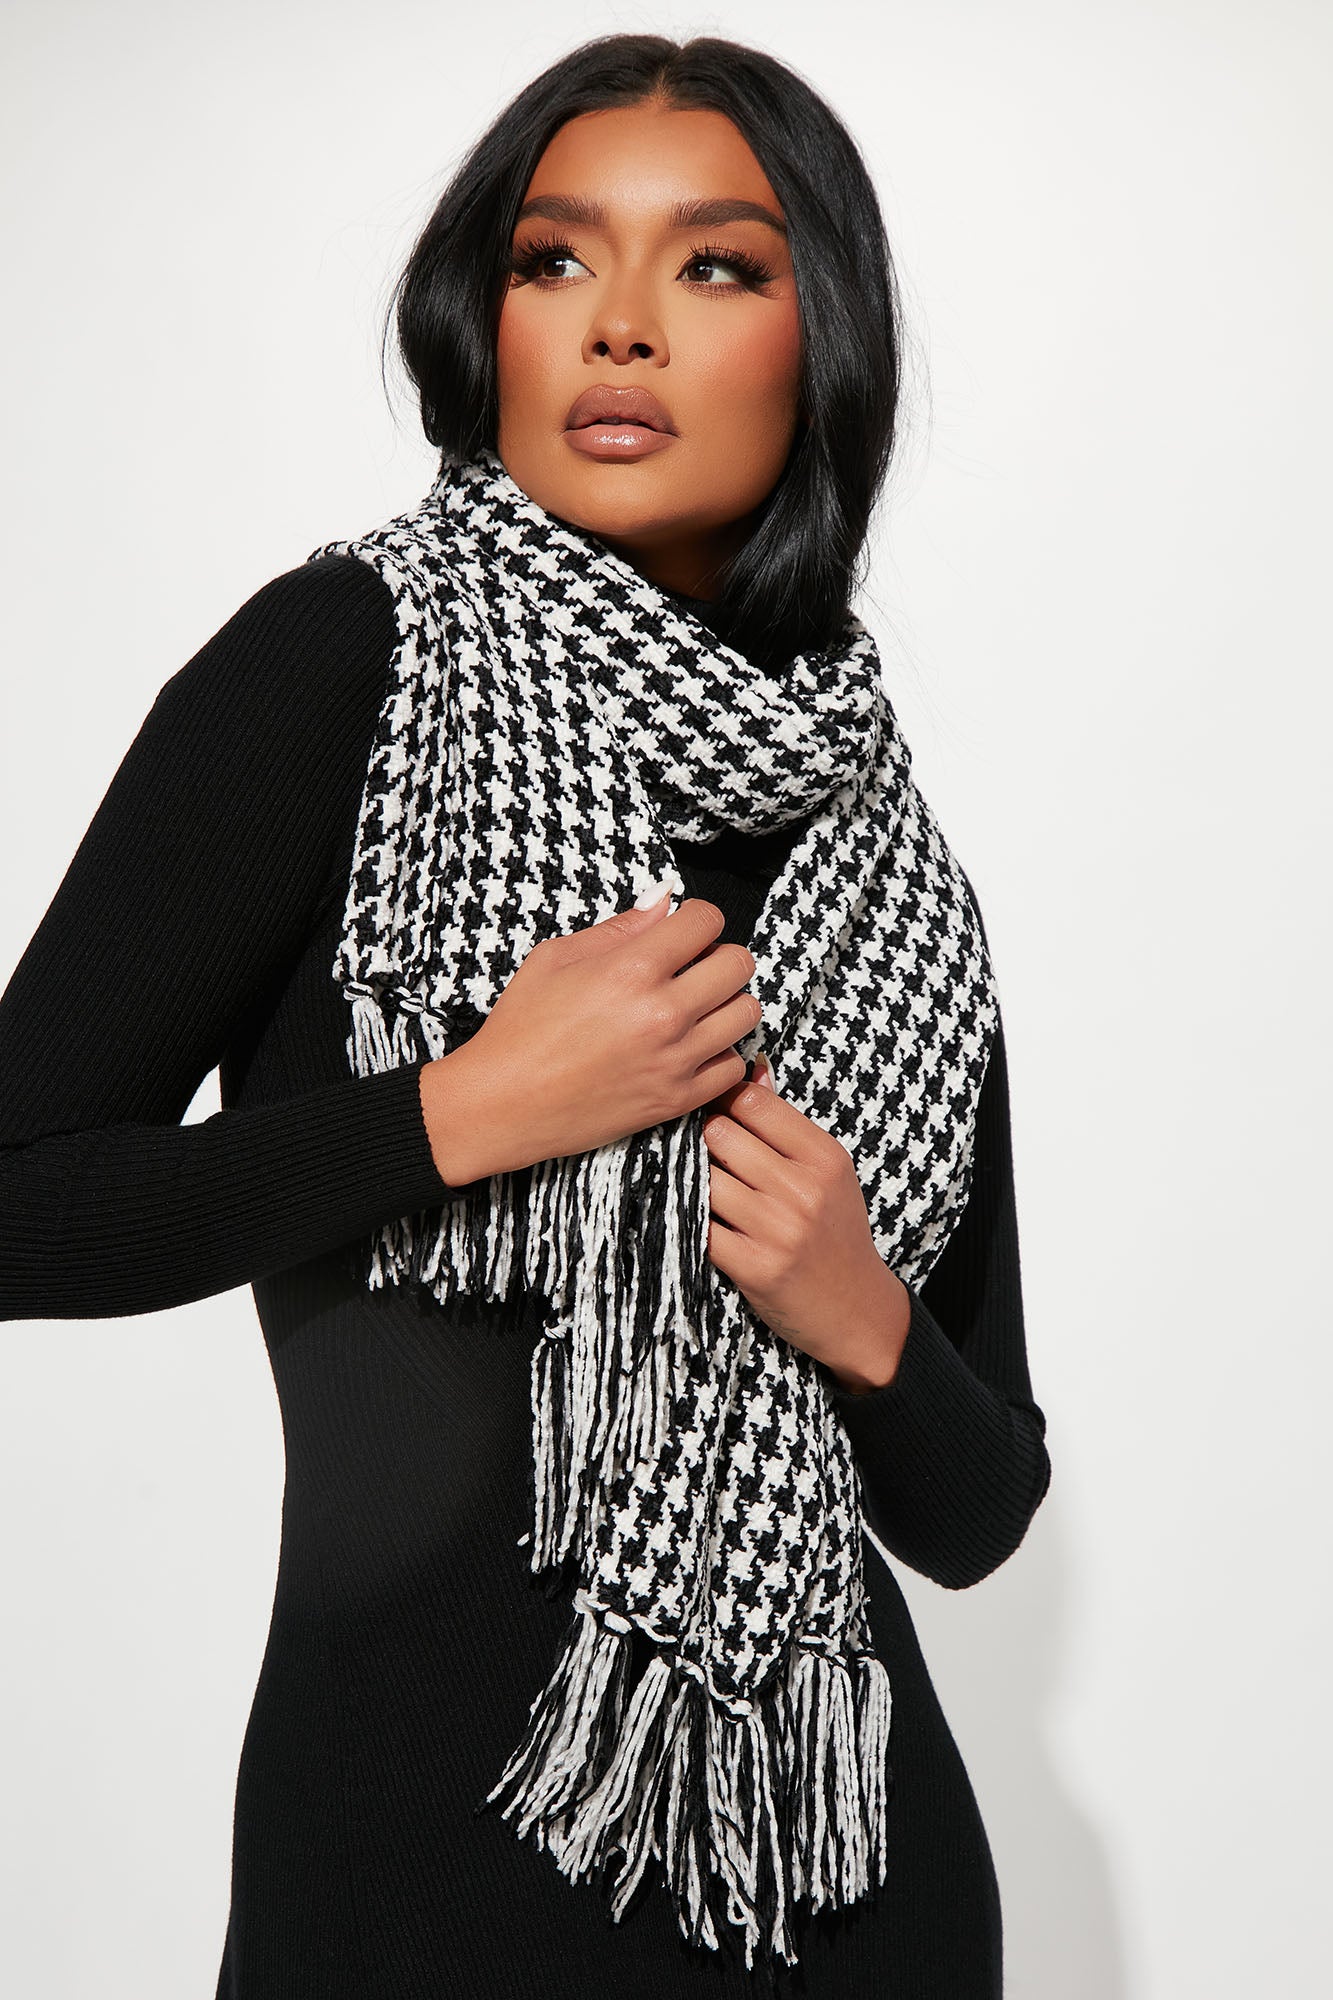 Houndstooth Scarf Women, Apparel Houndstooth Scarves